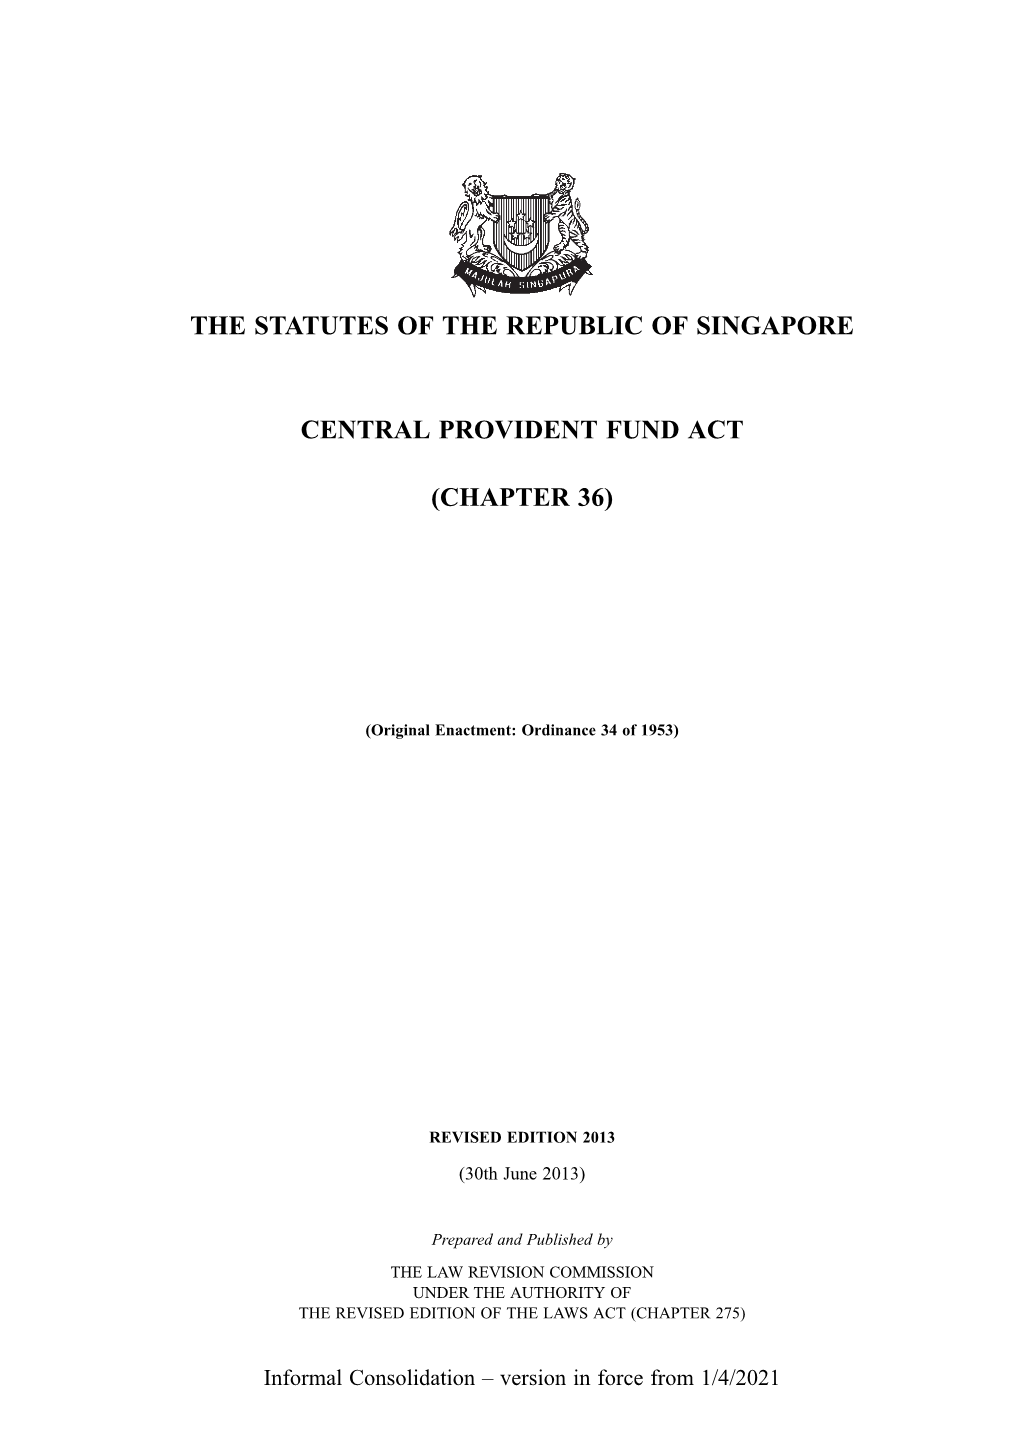 The Statutes of the Republic of Singapore Central Provident Fund Act (Chapter